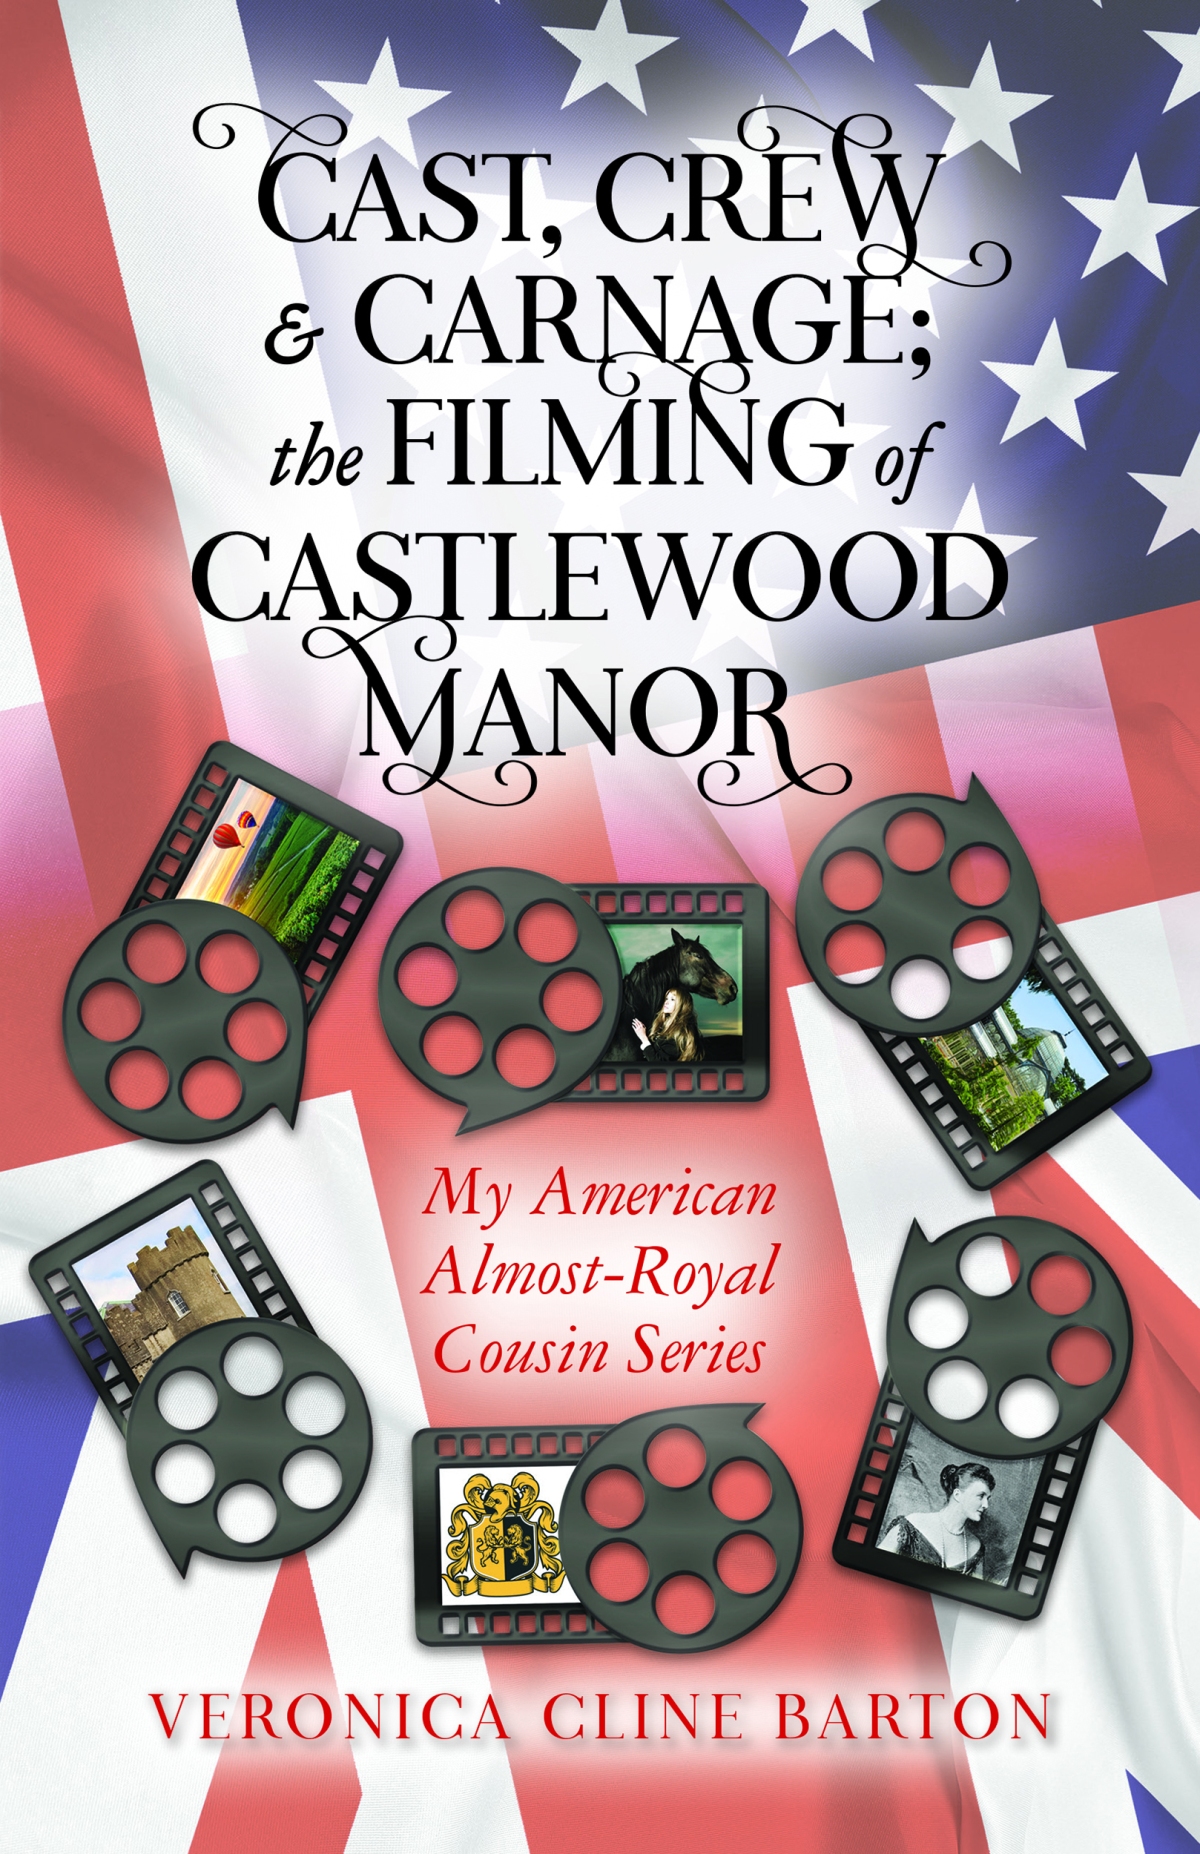 Cast, Crew, & Carnage; the Filming of Castlewood Manor—2nd Book in the My American Almost Royal Cousin Series Makes its Almost Royal Debut!